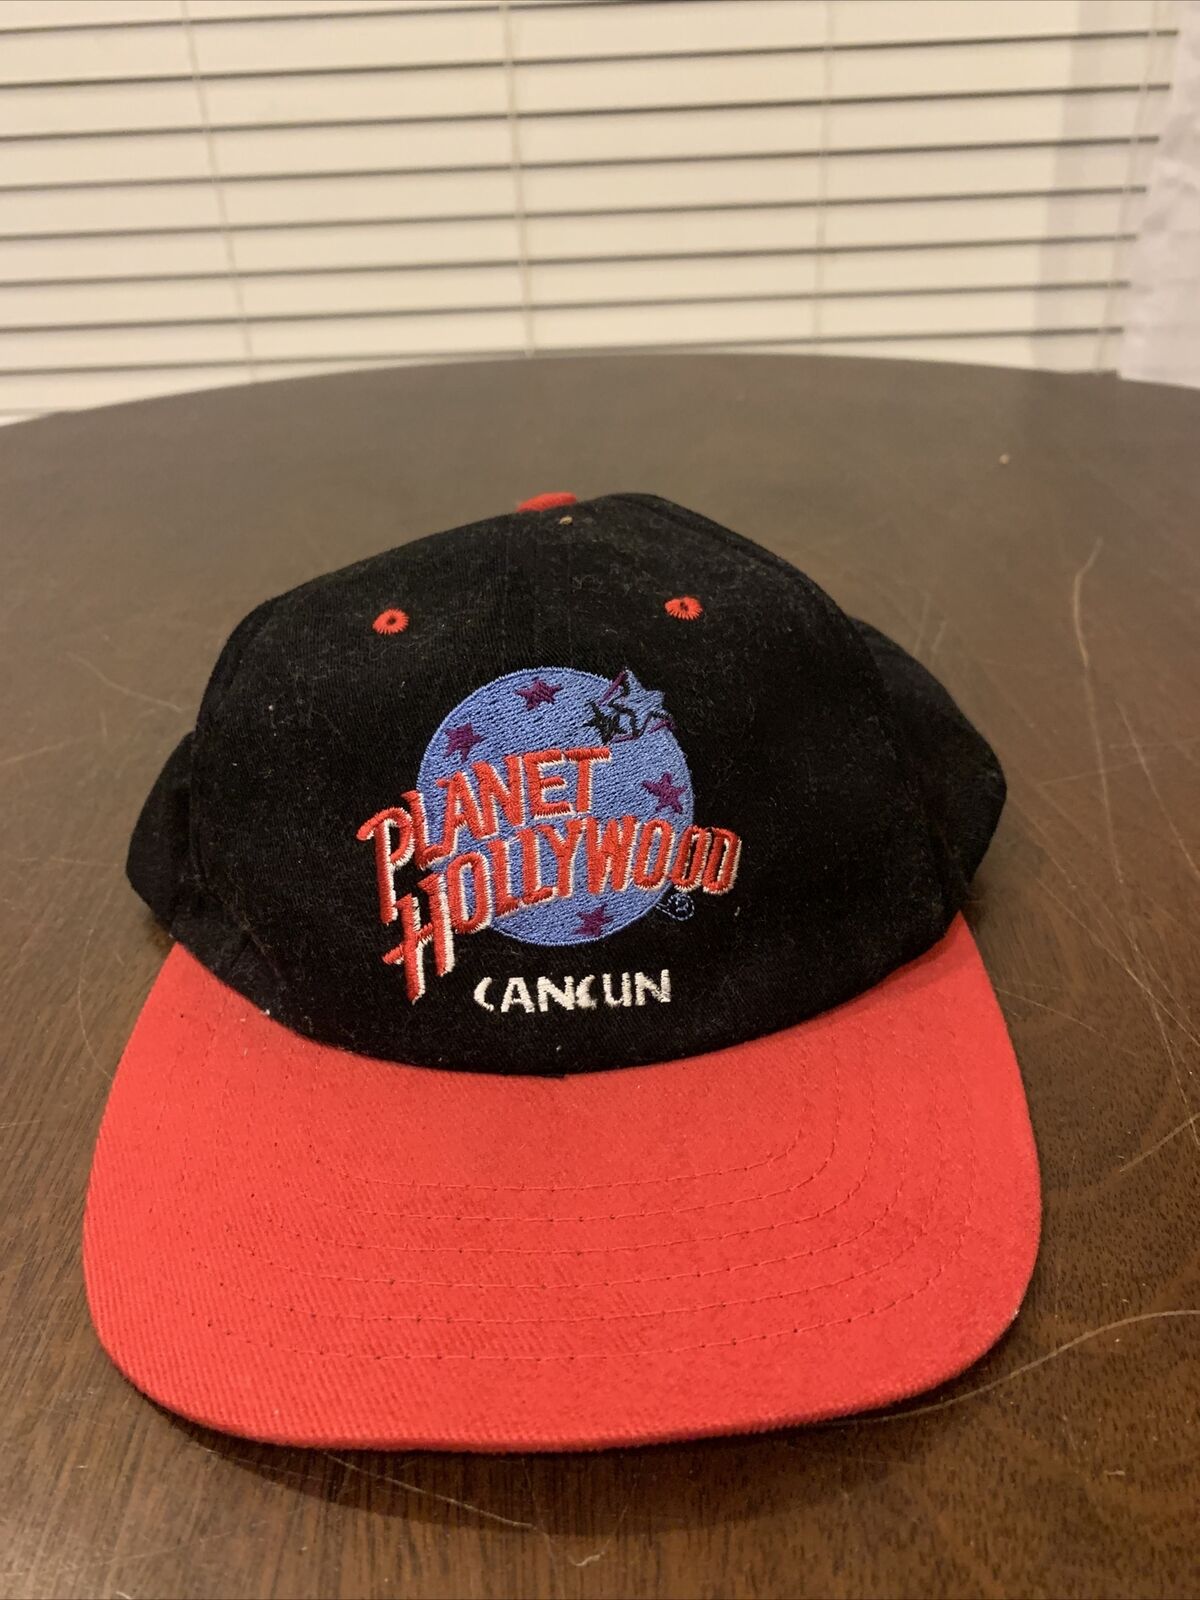 Vintage! Made In The Usa Planet Hollywood Cancun Restaurant Adjustable Snapback￼